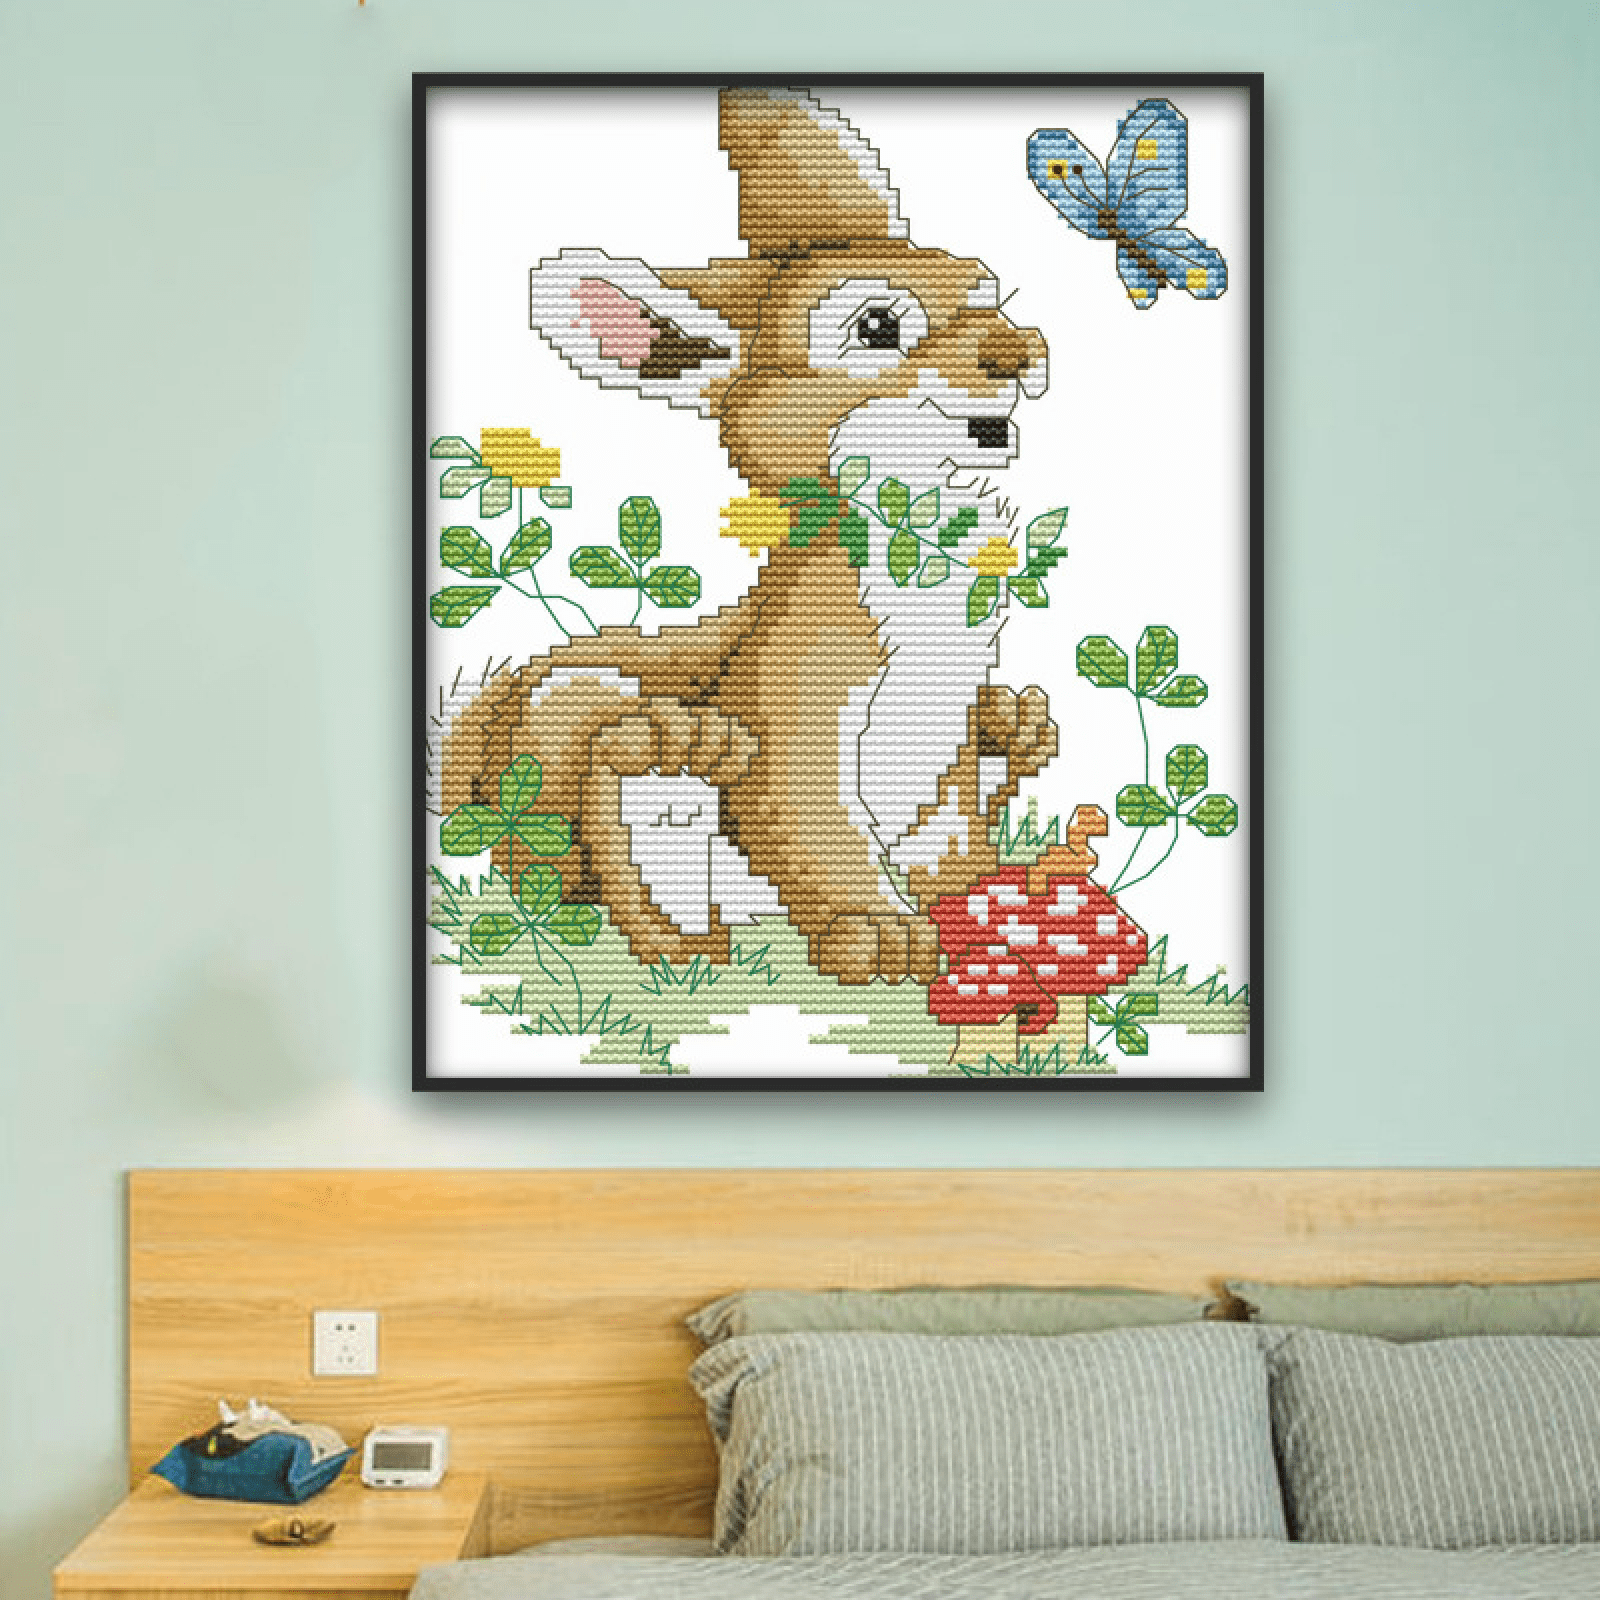 cRAFTILOO cats cross stitch kits for beginners. 5 stamped cross stitch kits  for kids.needlepoint kits